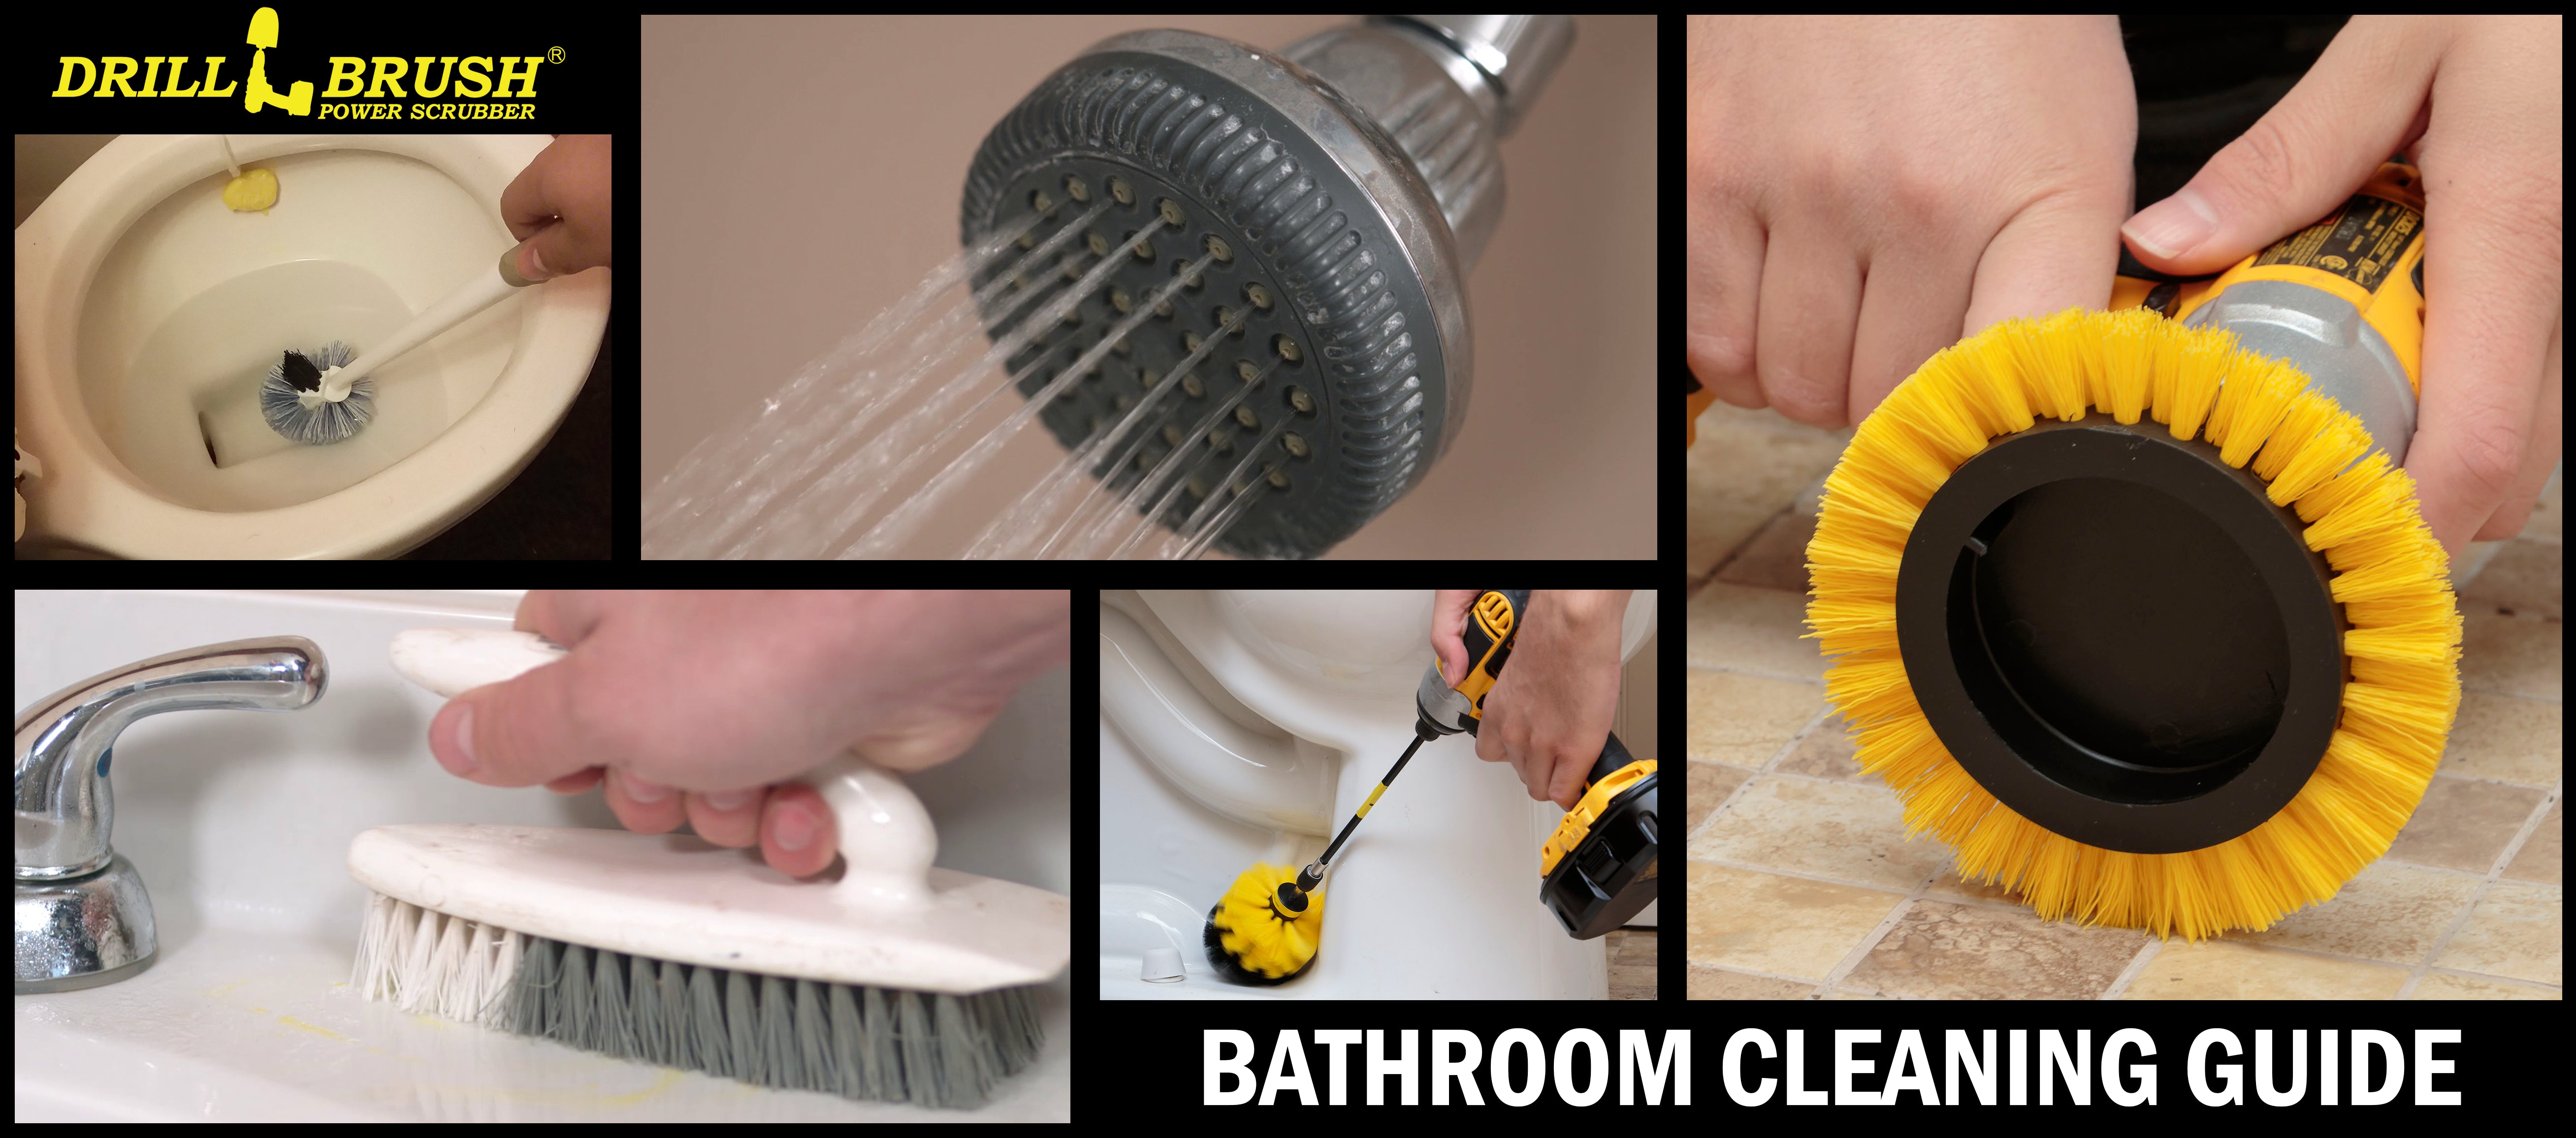 Drillbrush’s Guide to Keeping Your Bathroom Spotless and Clean